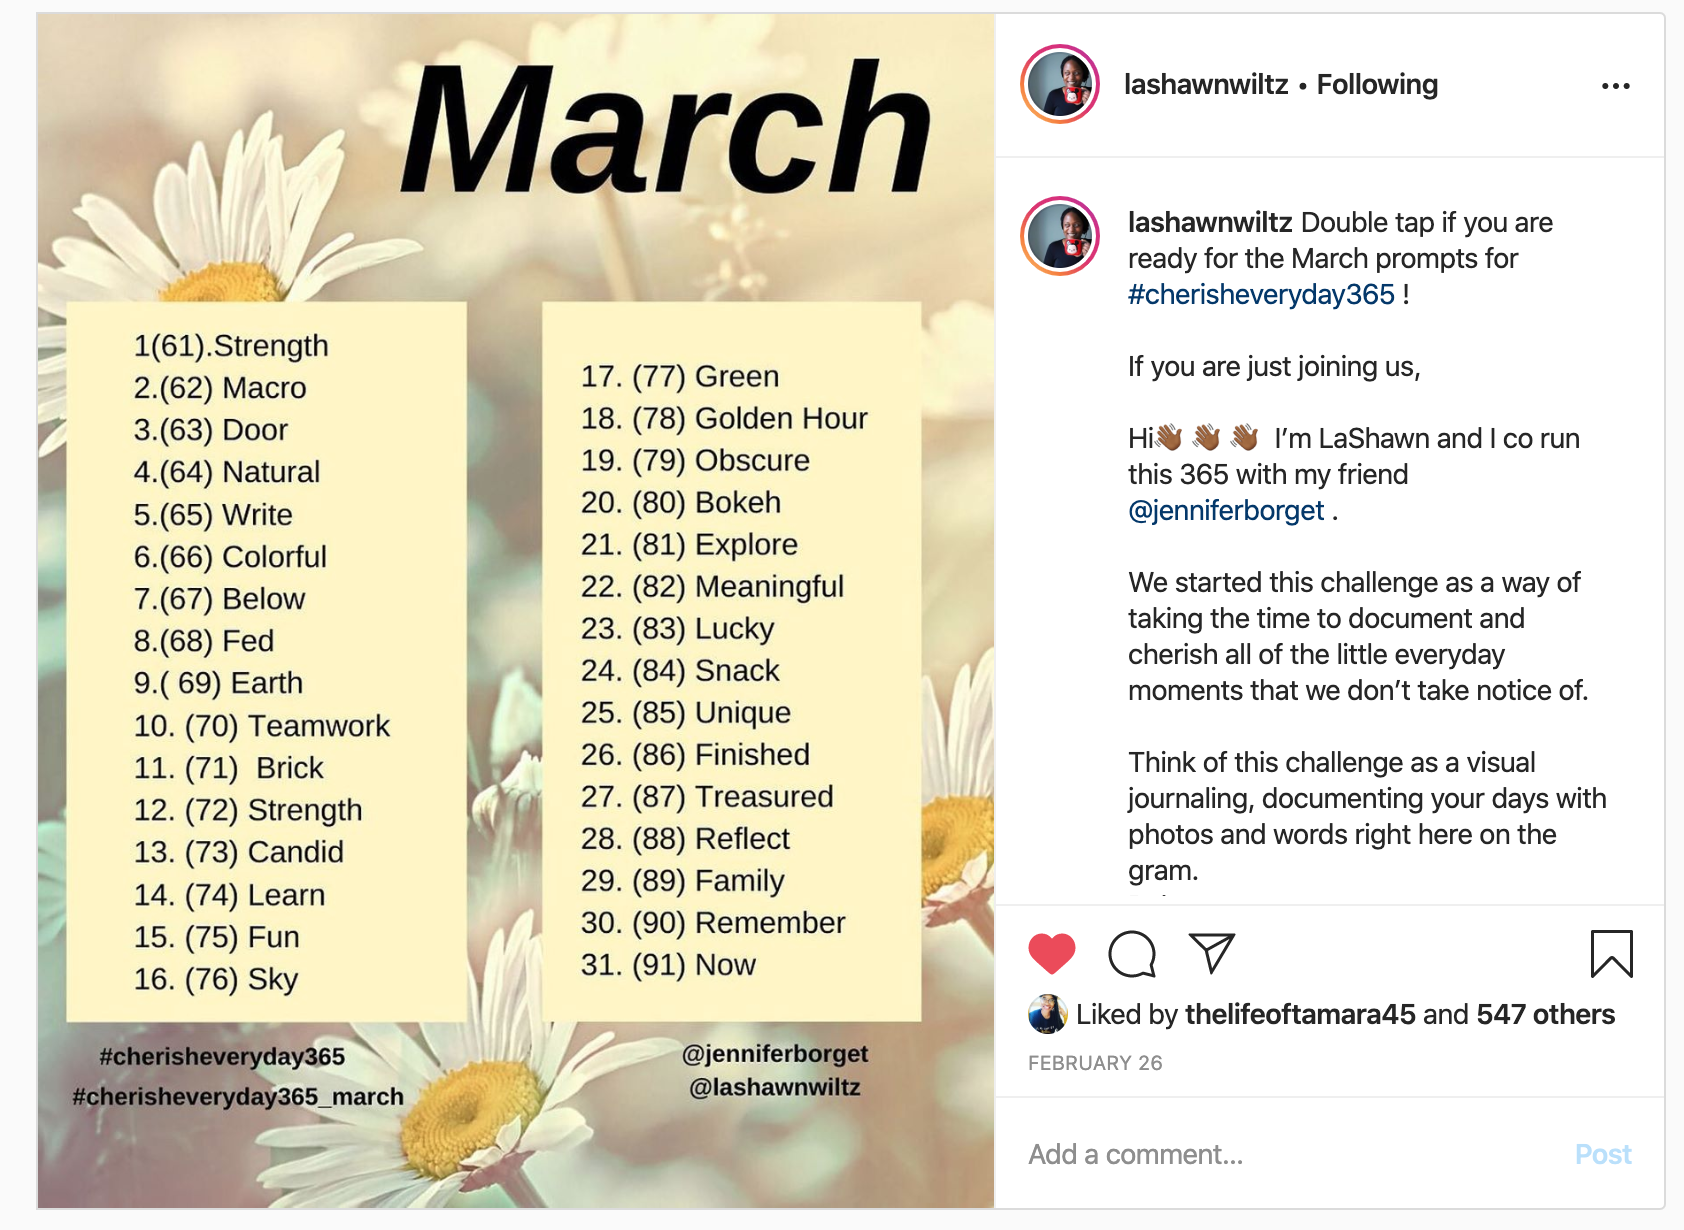 March prompts for #cherisheveryday365